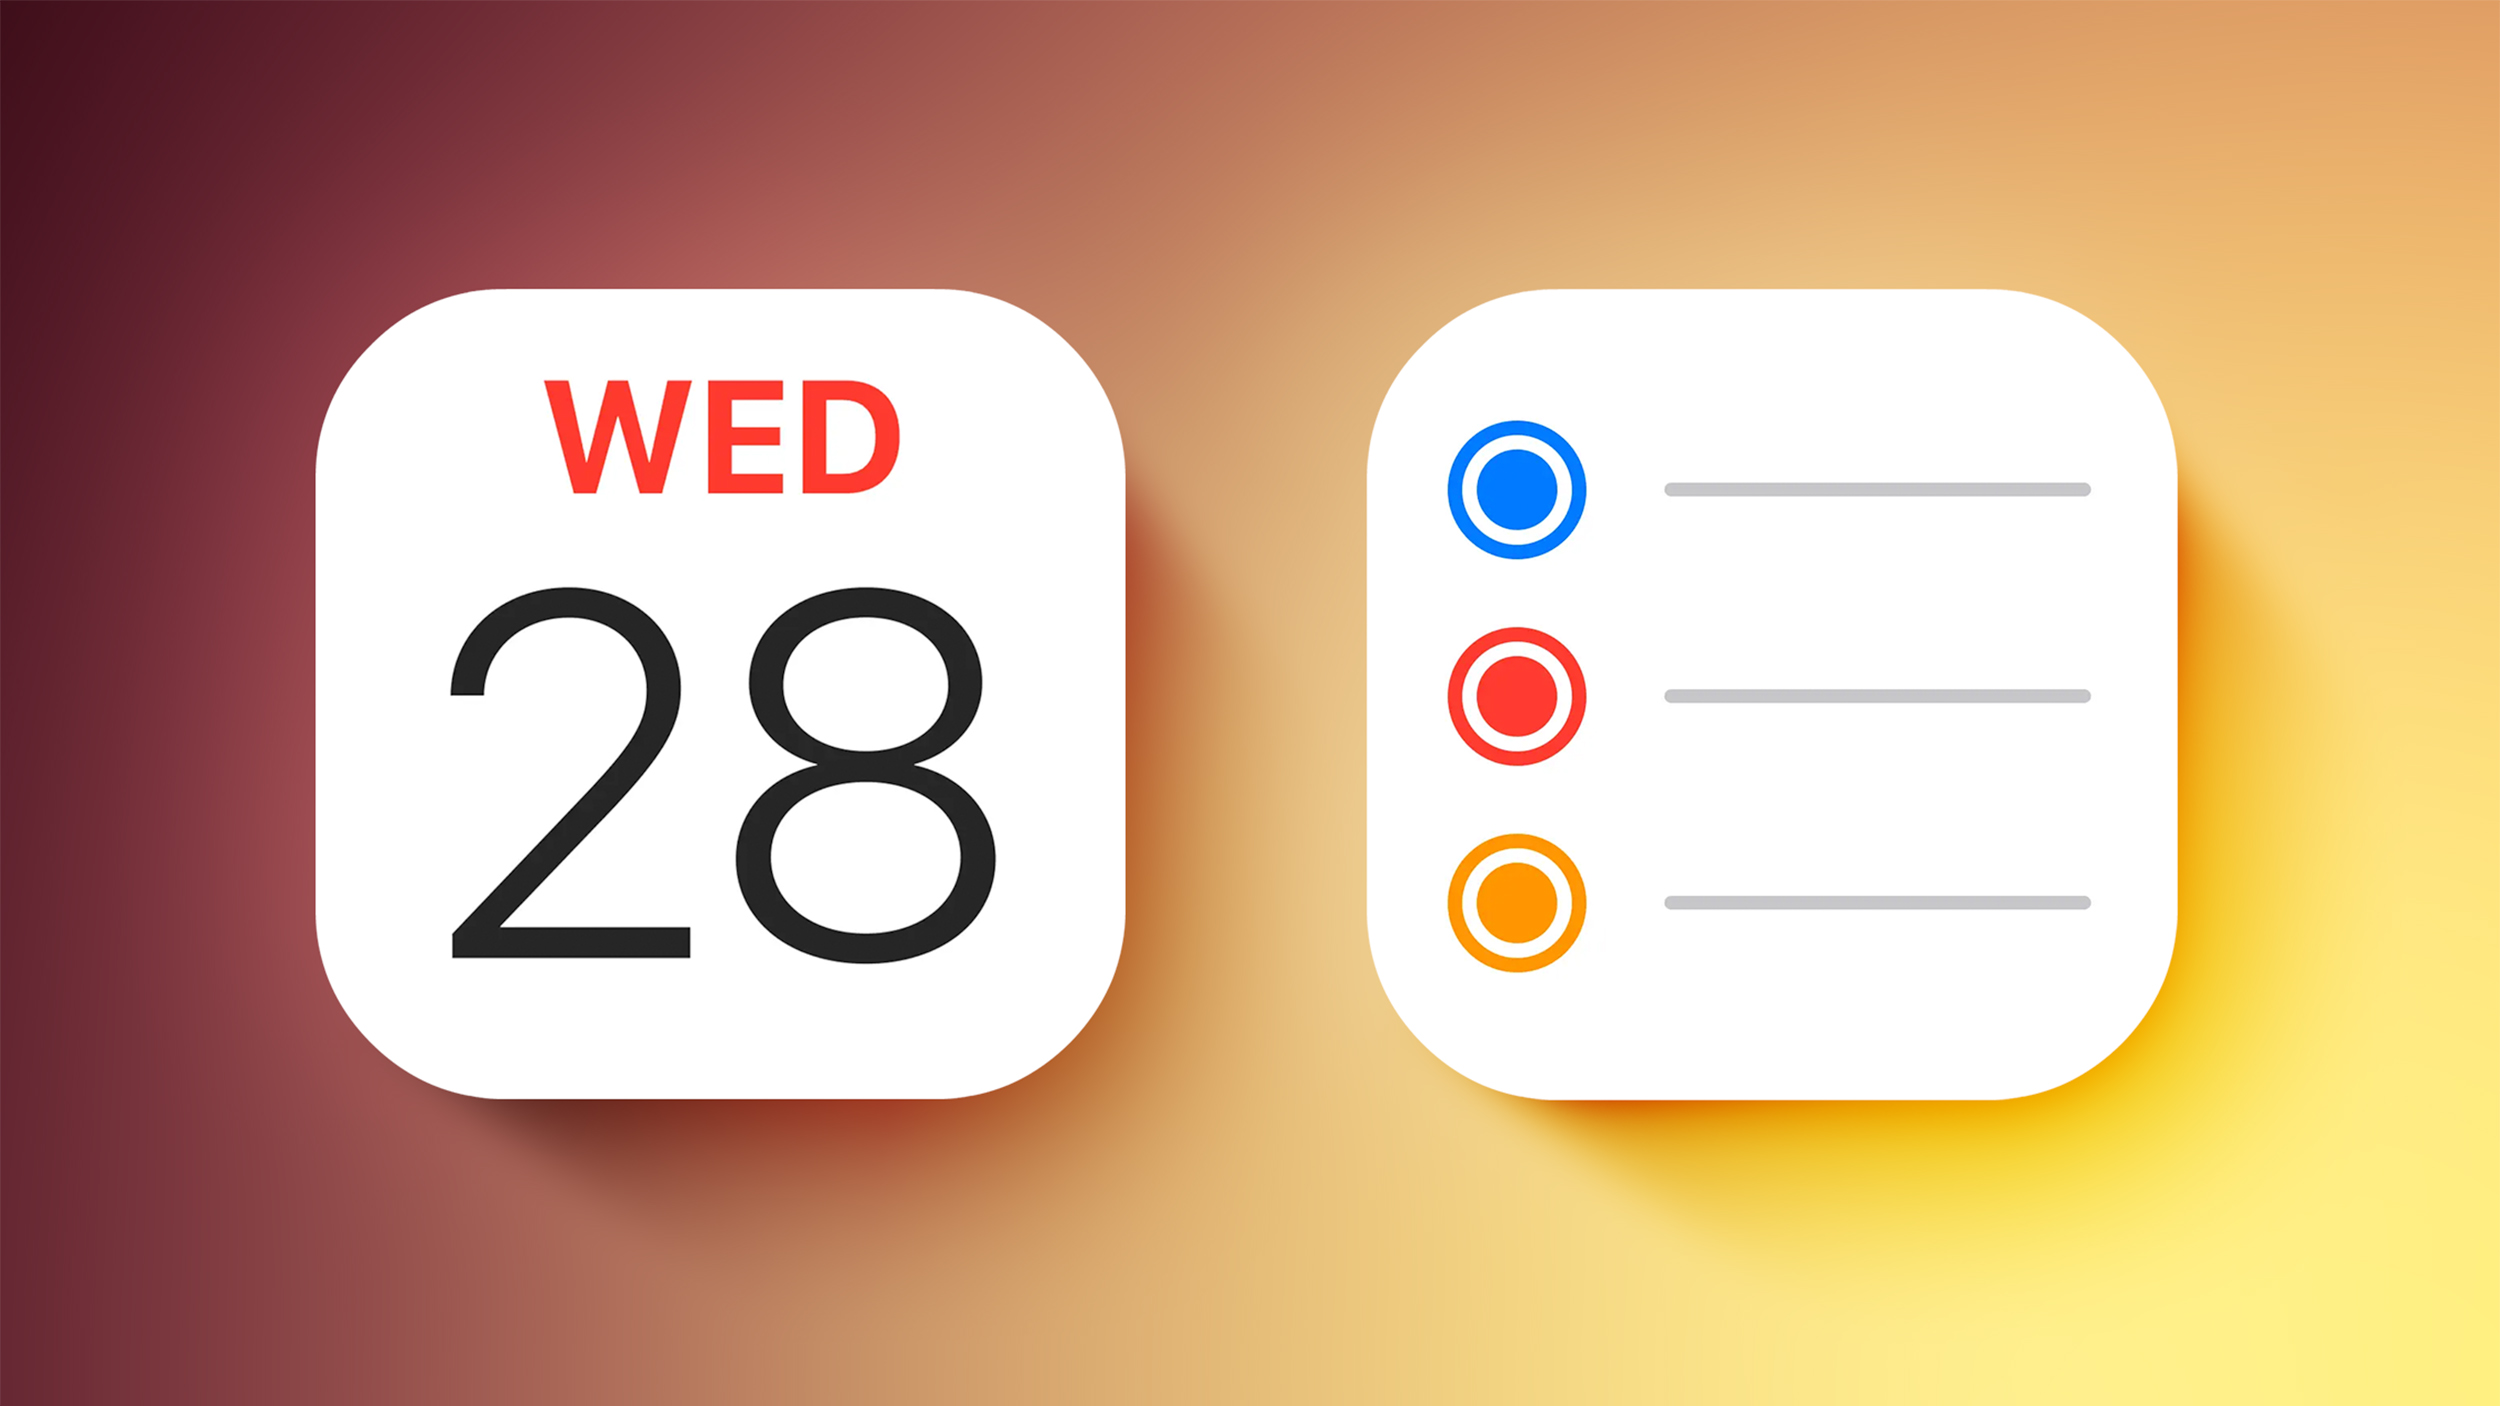 iOS 18 Rumor: Calendar App to Feature Integration With Reminders App